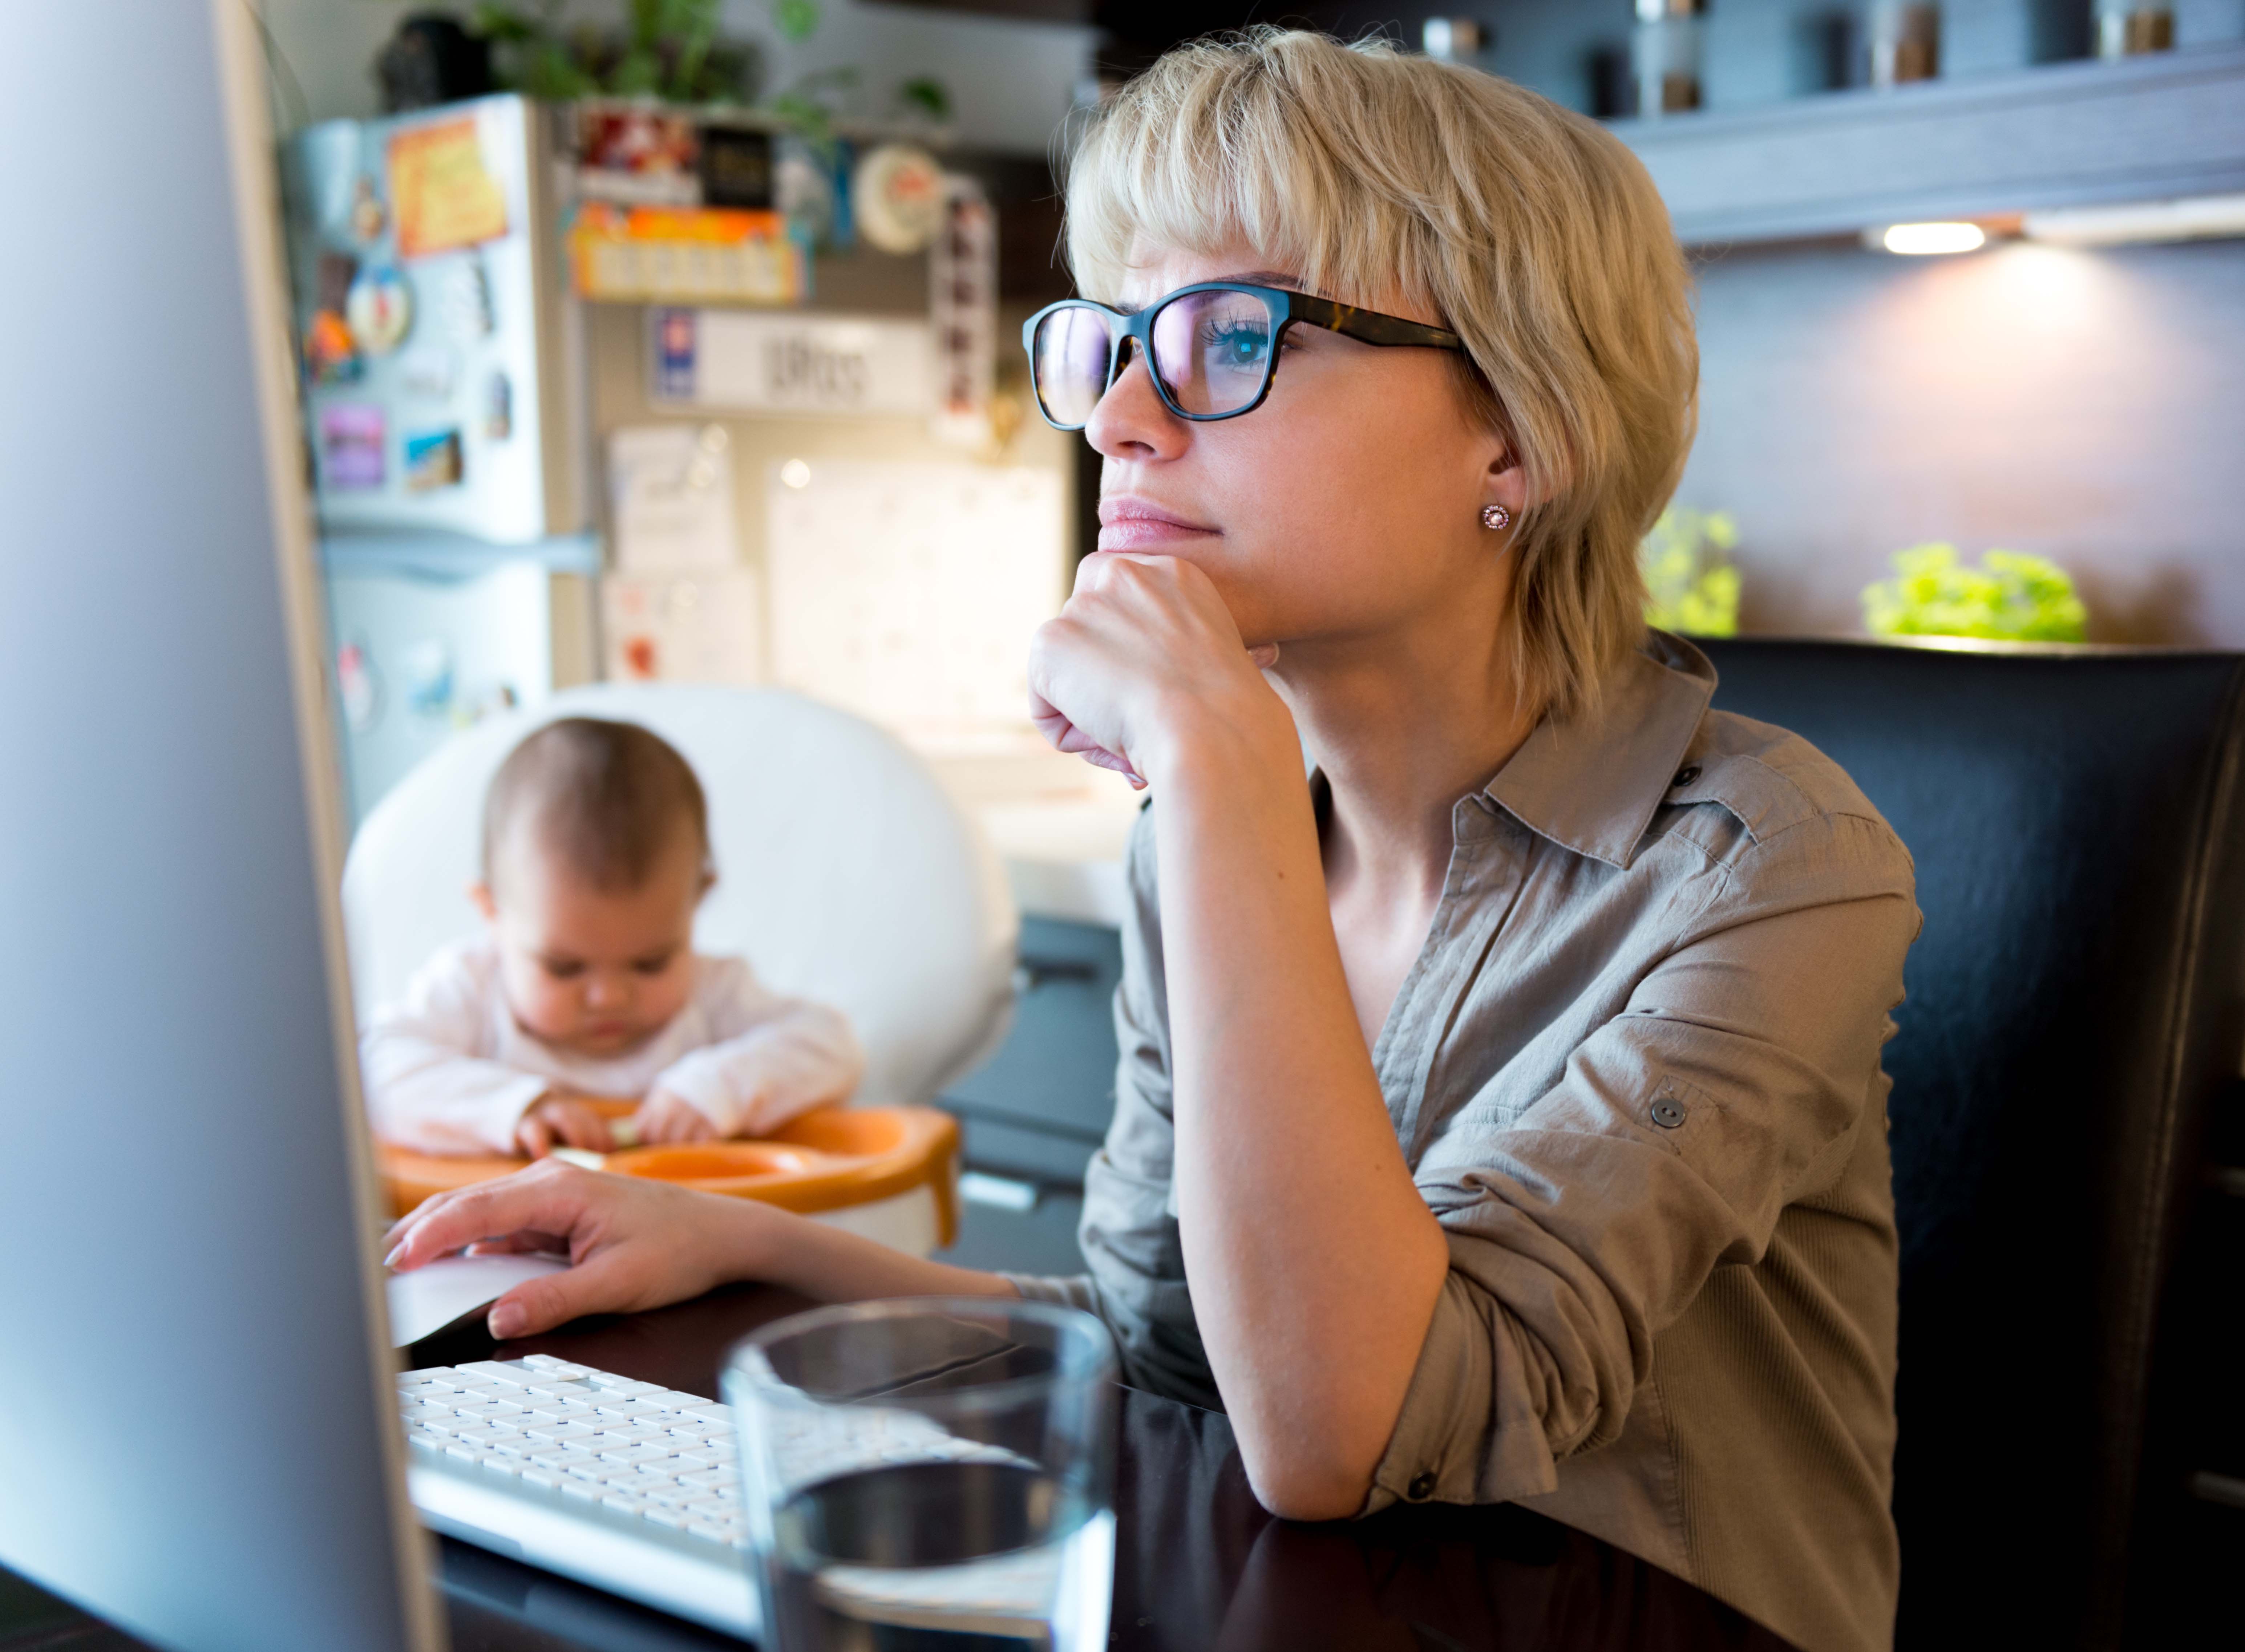 Could flexible working help close the gender gap?